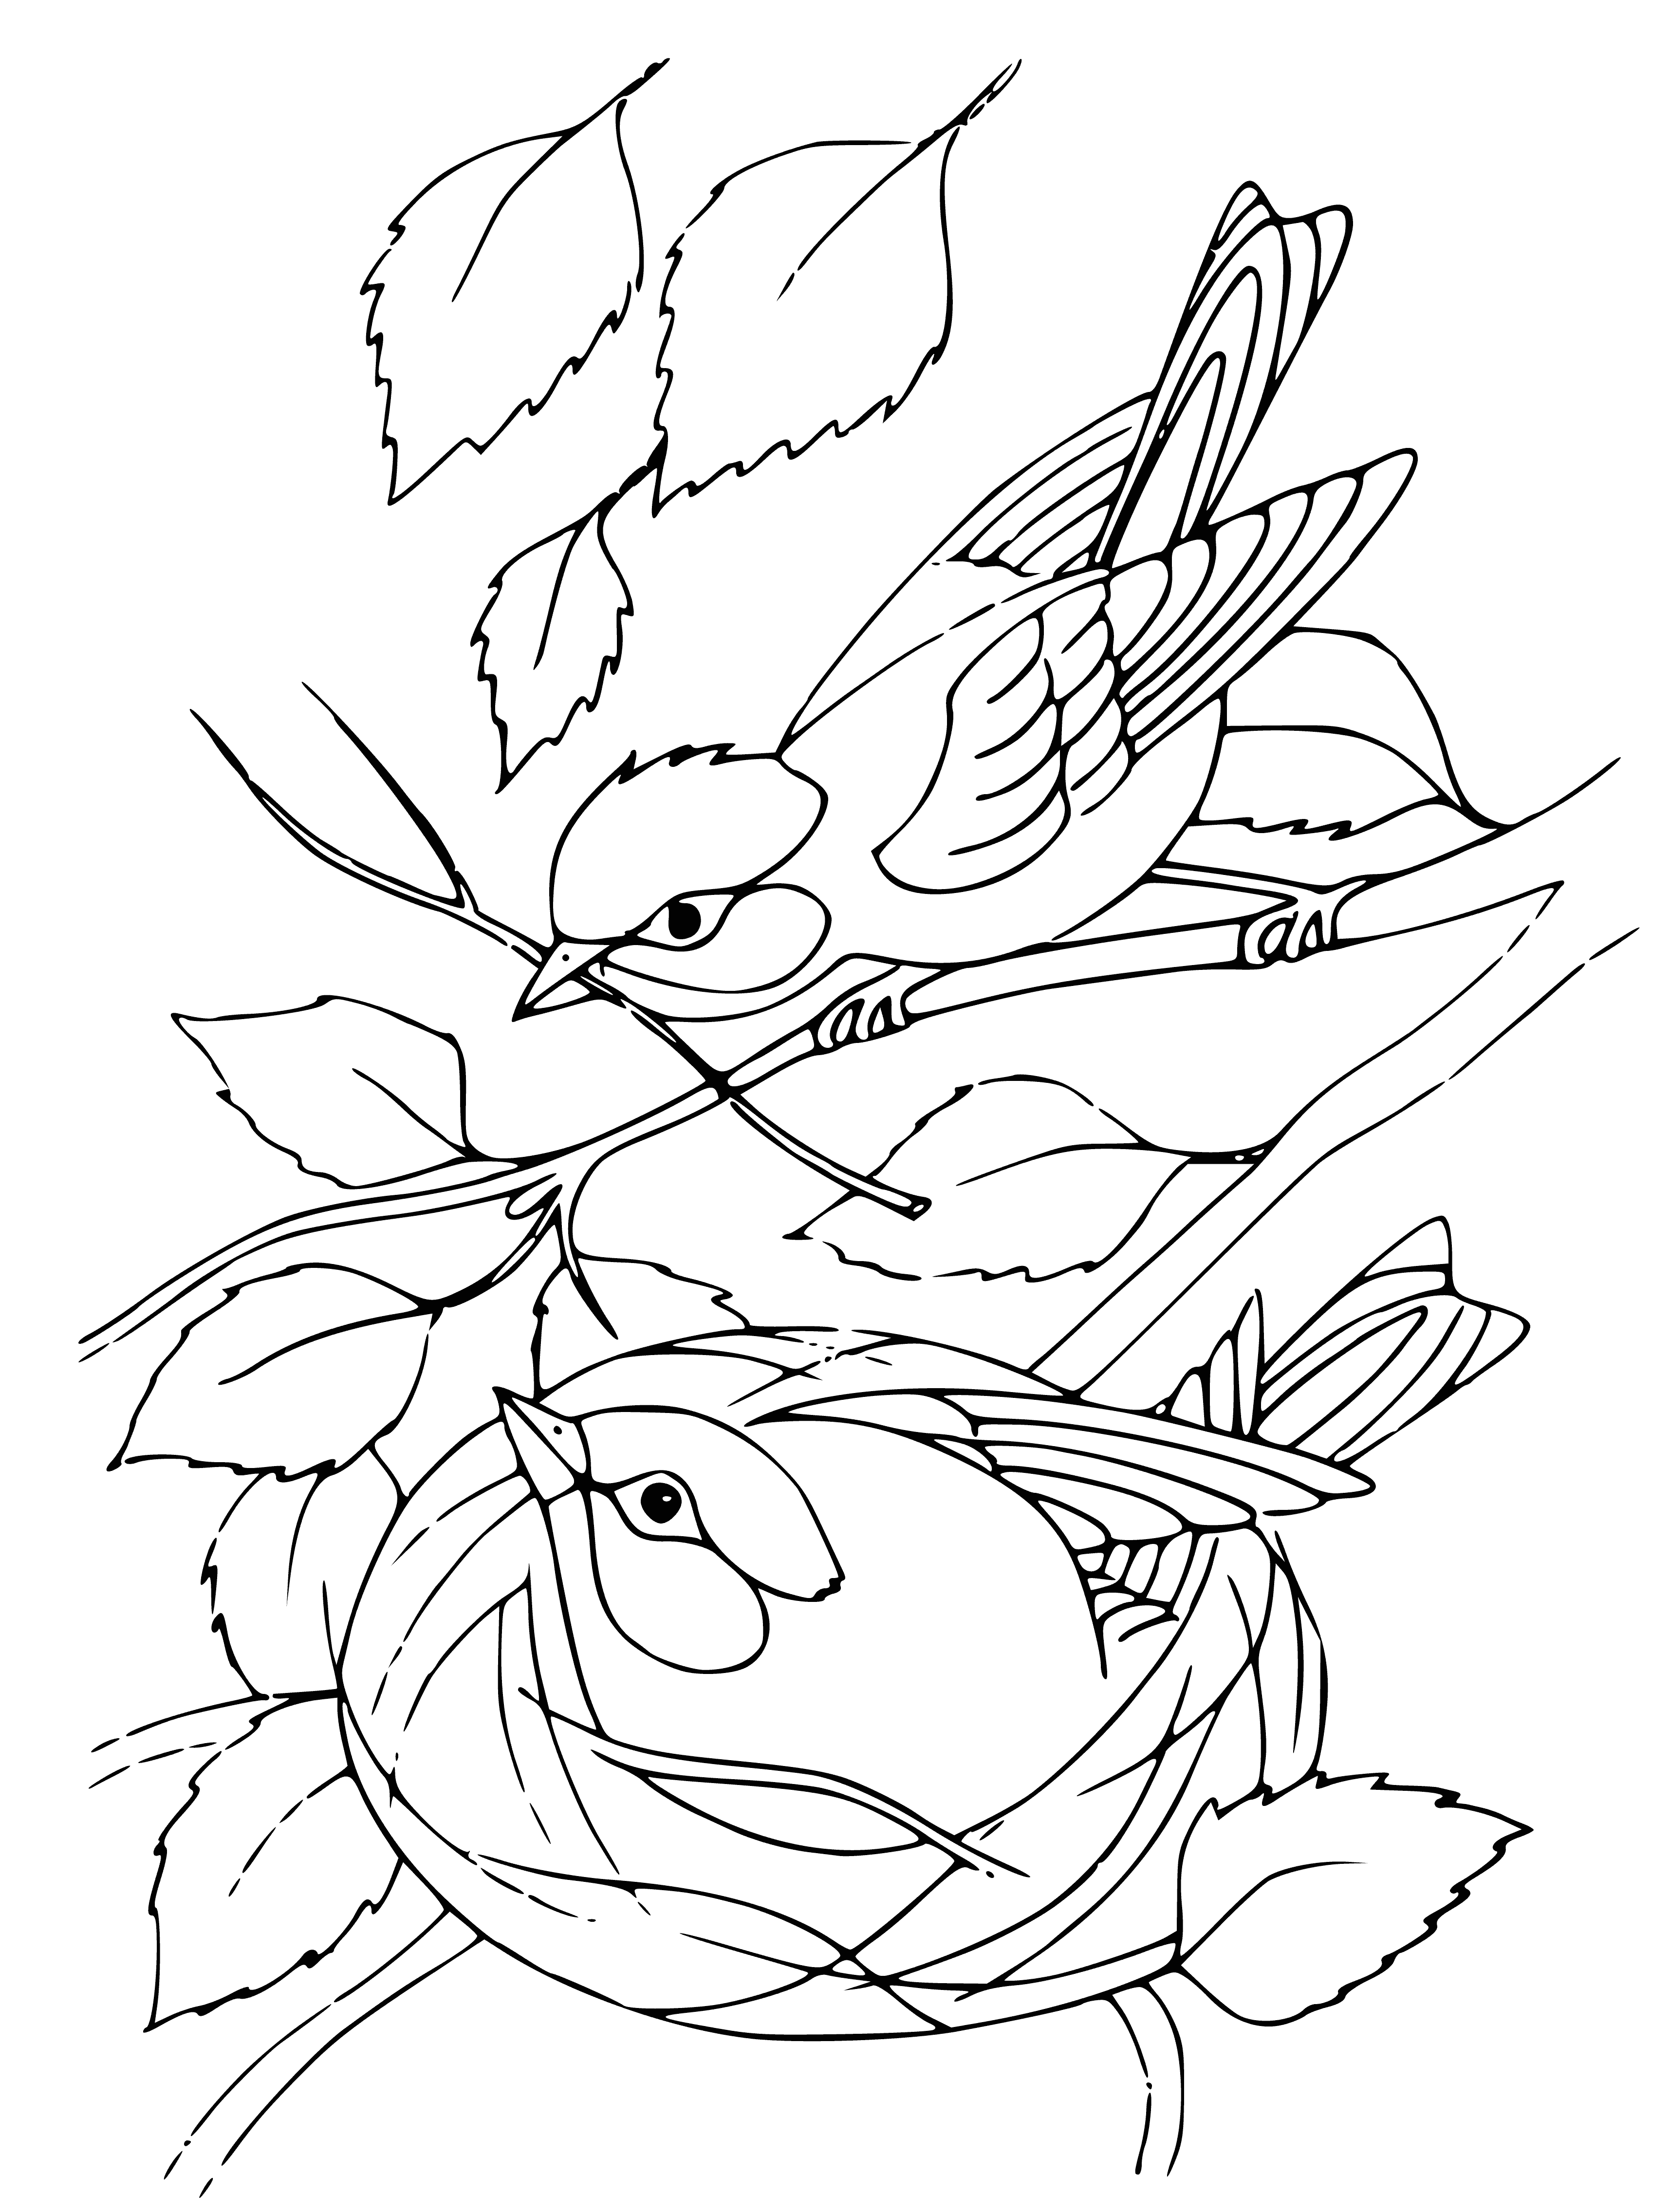 coloring page: Two birds converse on a branch with long beaks & tails, a nest nearby.